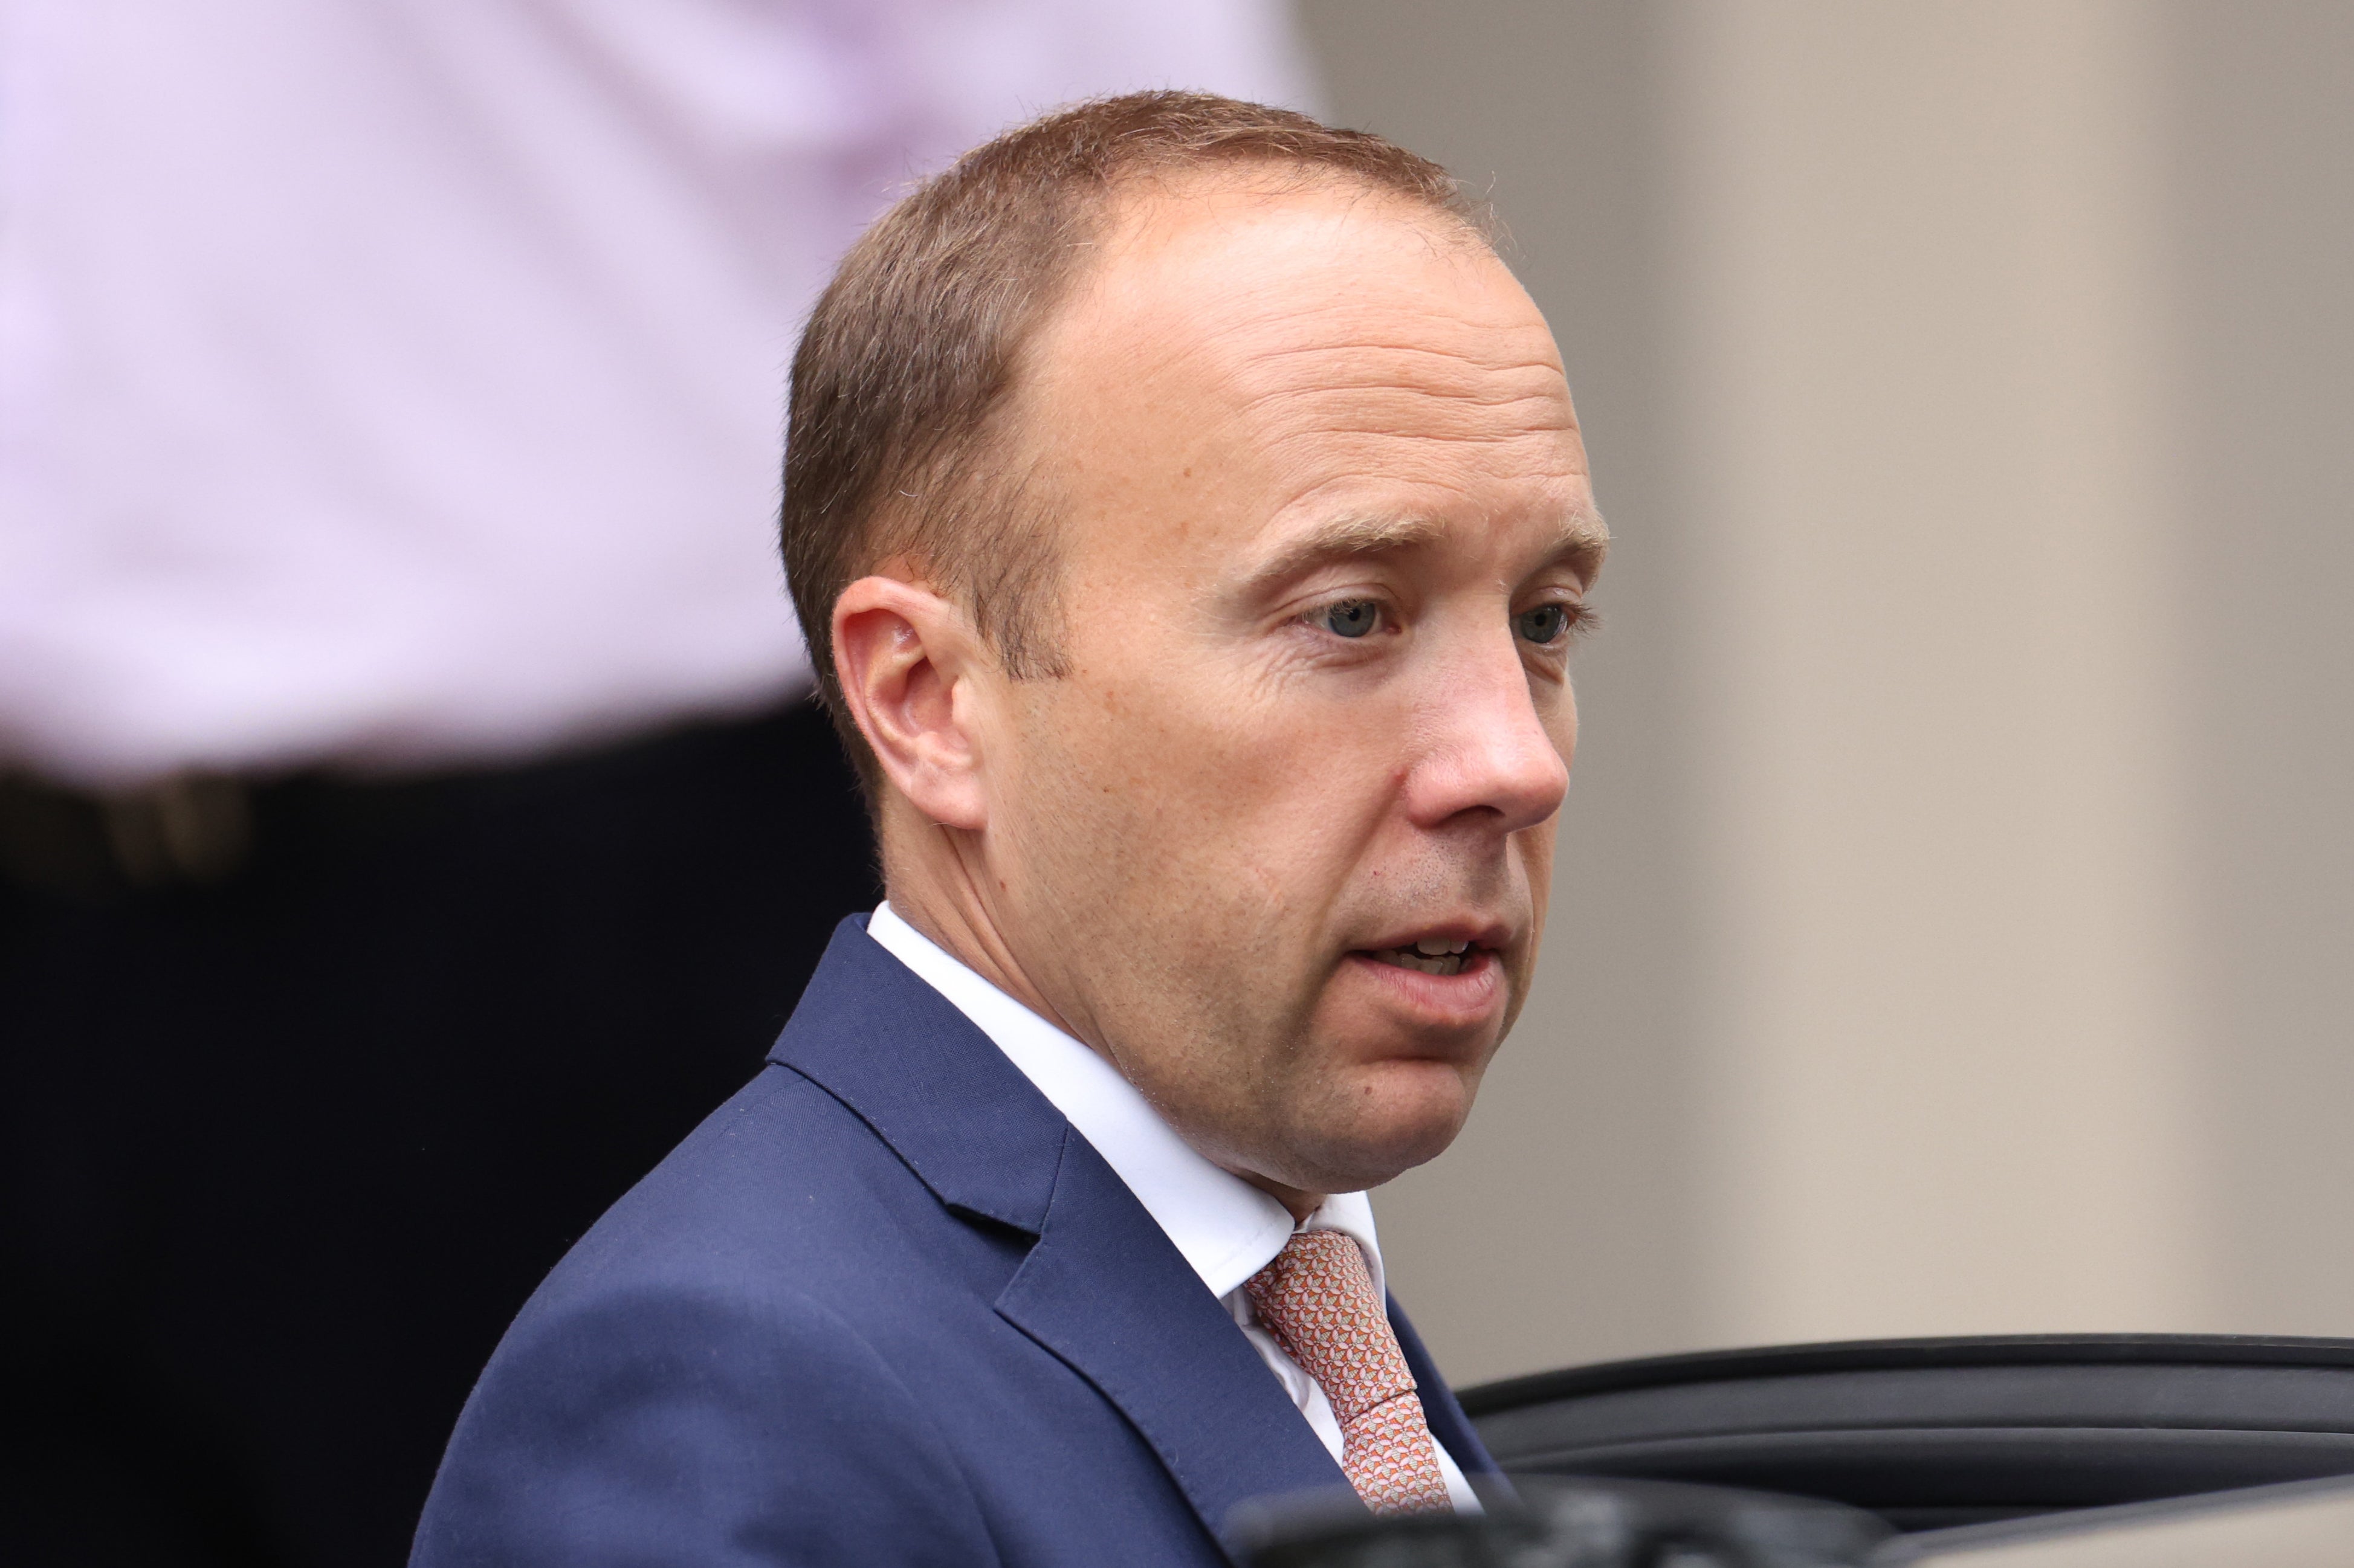 Former health secretary Matt Hancock was also criticised by the accused, the court heard